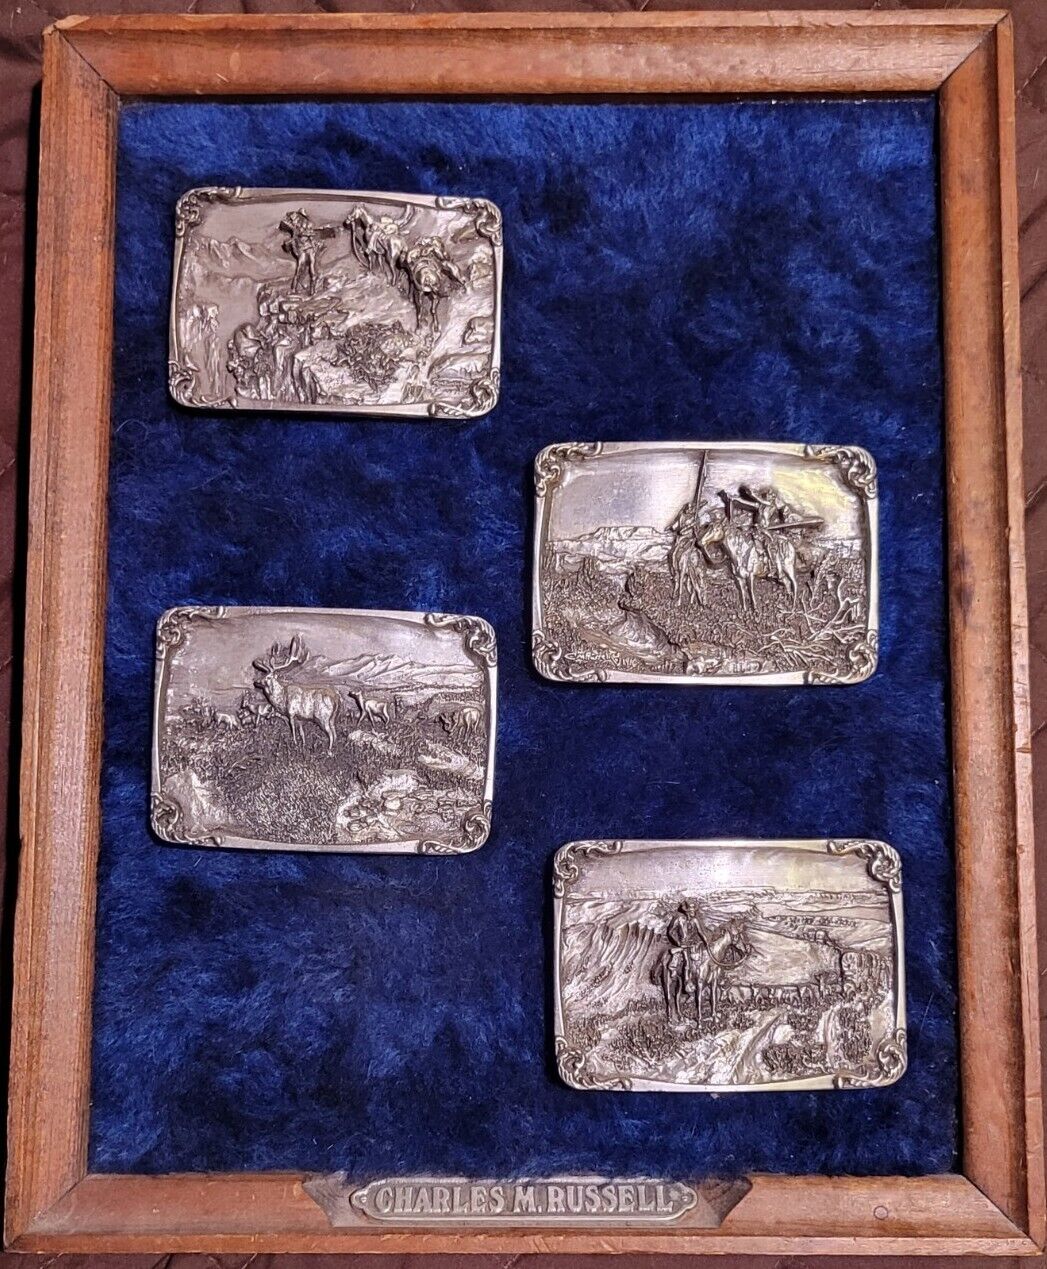 Charles M. Russell 1984 Collectable Belt Buckle Set #1799 by Siskiyou Buckle Co.